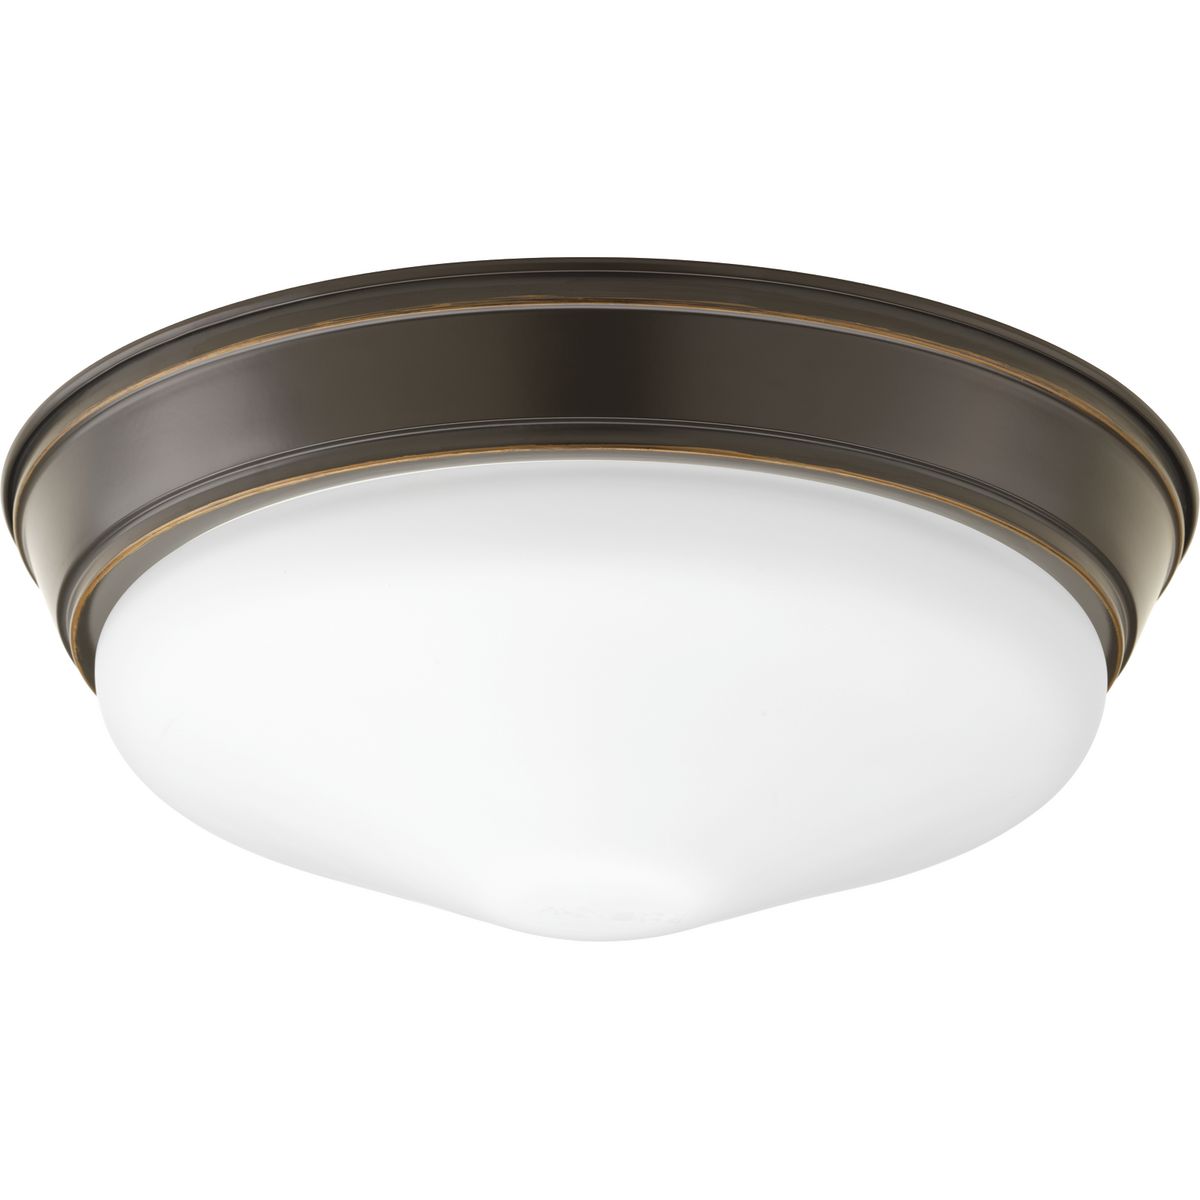 One-light 12-3/4 in LED Flush Mount series featuring an etched glass shade in an Antique Bronze finish. Fixtures are dimmable to 10 percent with Triac or ELV dimmers.